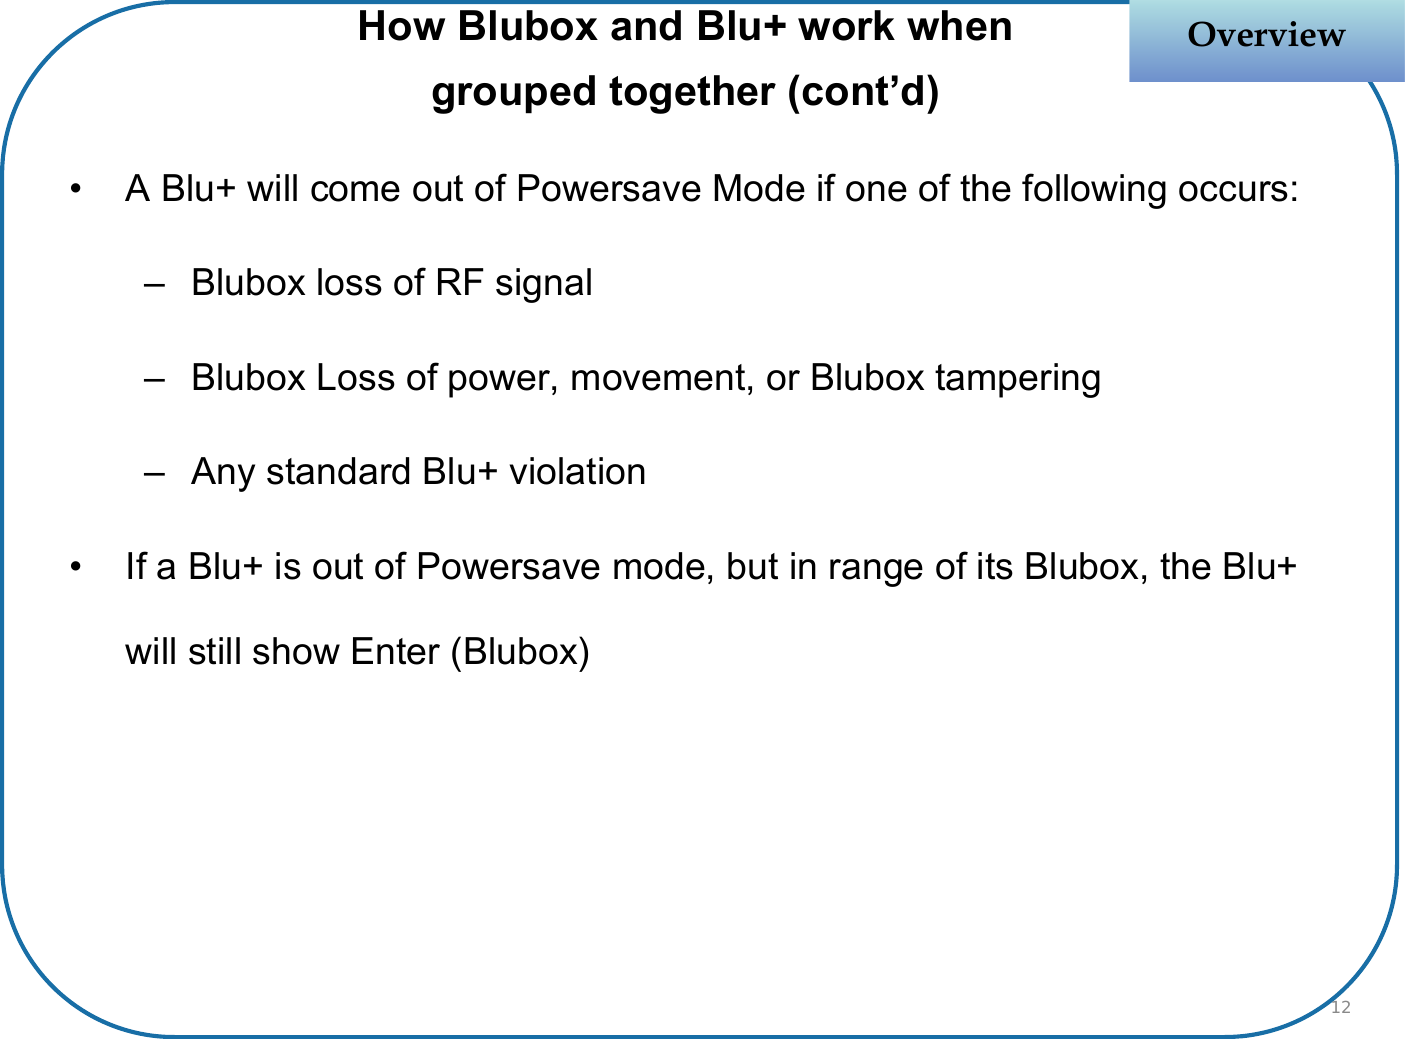 OverviewOverview• A Blu+ will come out of Powersave Mode if one of the following occurs:– Blubox loss of RF signal  – Blubox Loss of power, movement, or Blubox tampering– Any standard Blu+ violation• If a Blu+ is out of Powersave mode, but in range of its Blubox, the Blu+ will still show Enter (Blubox)How Blubox and Blu+ work when grouped together (cont’d)12